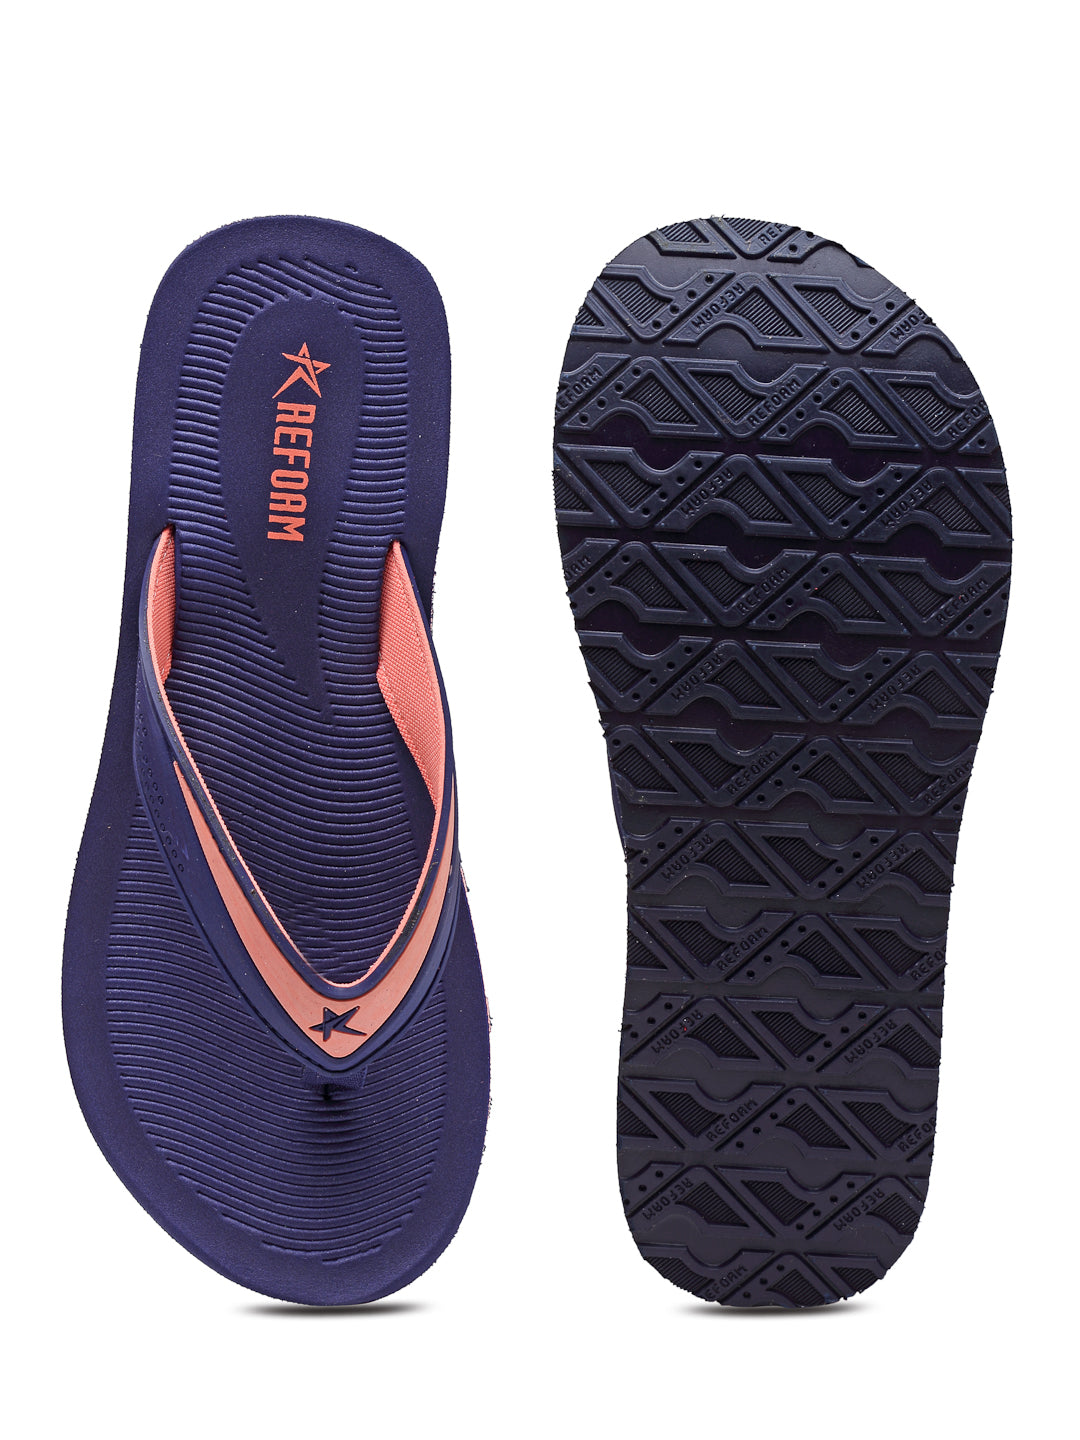 Navy Blue & Peach Solid Rubber Slip On Casual Slippers For Women